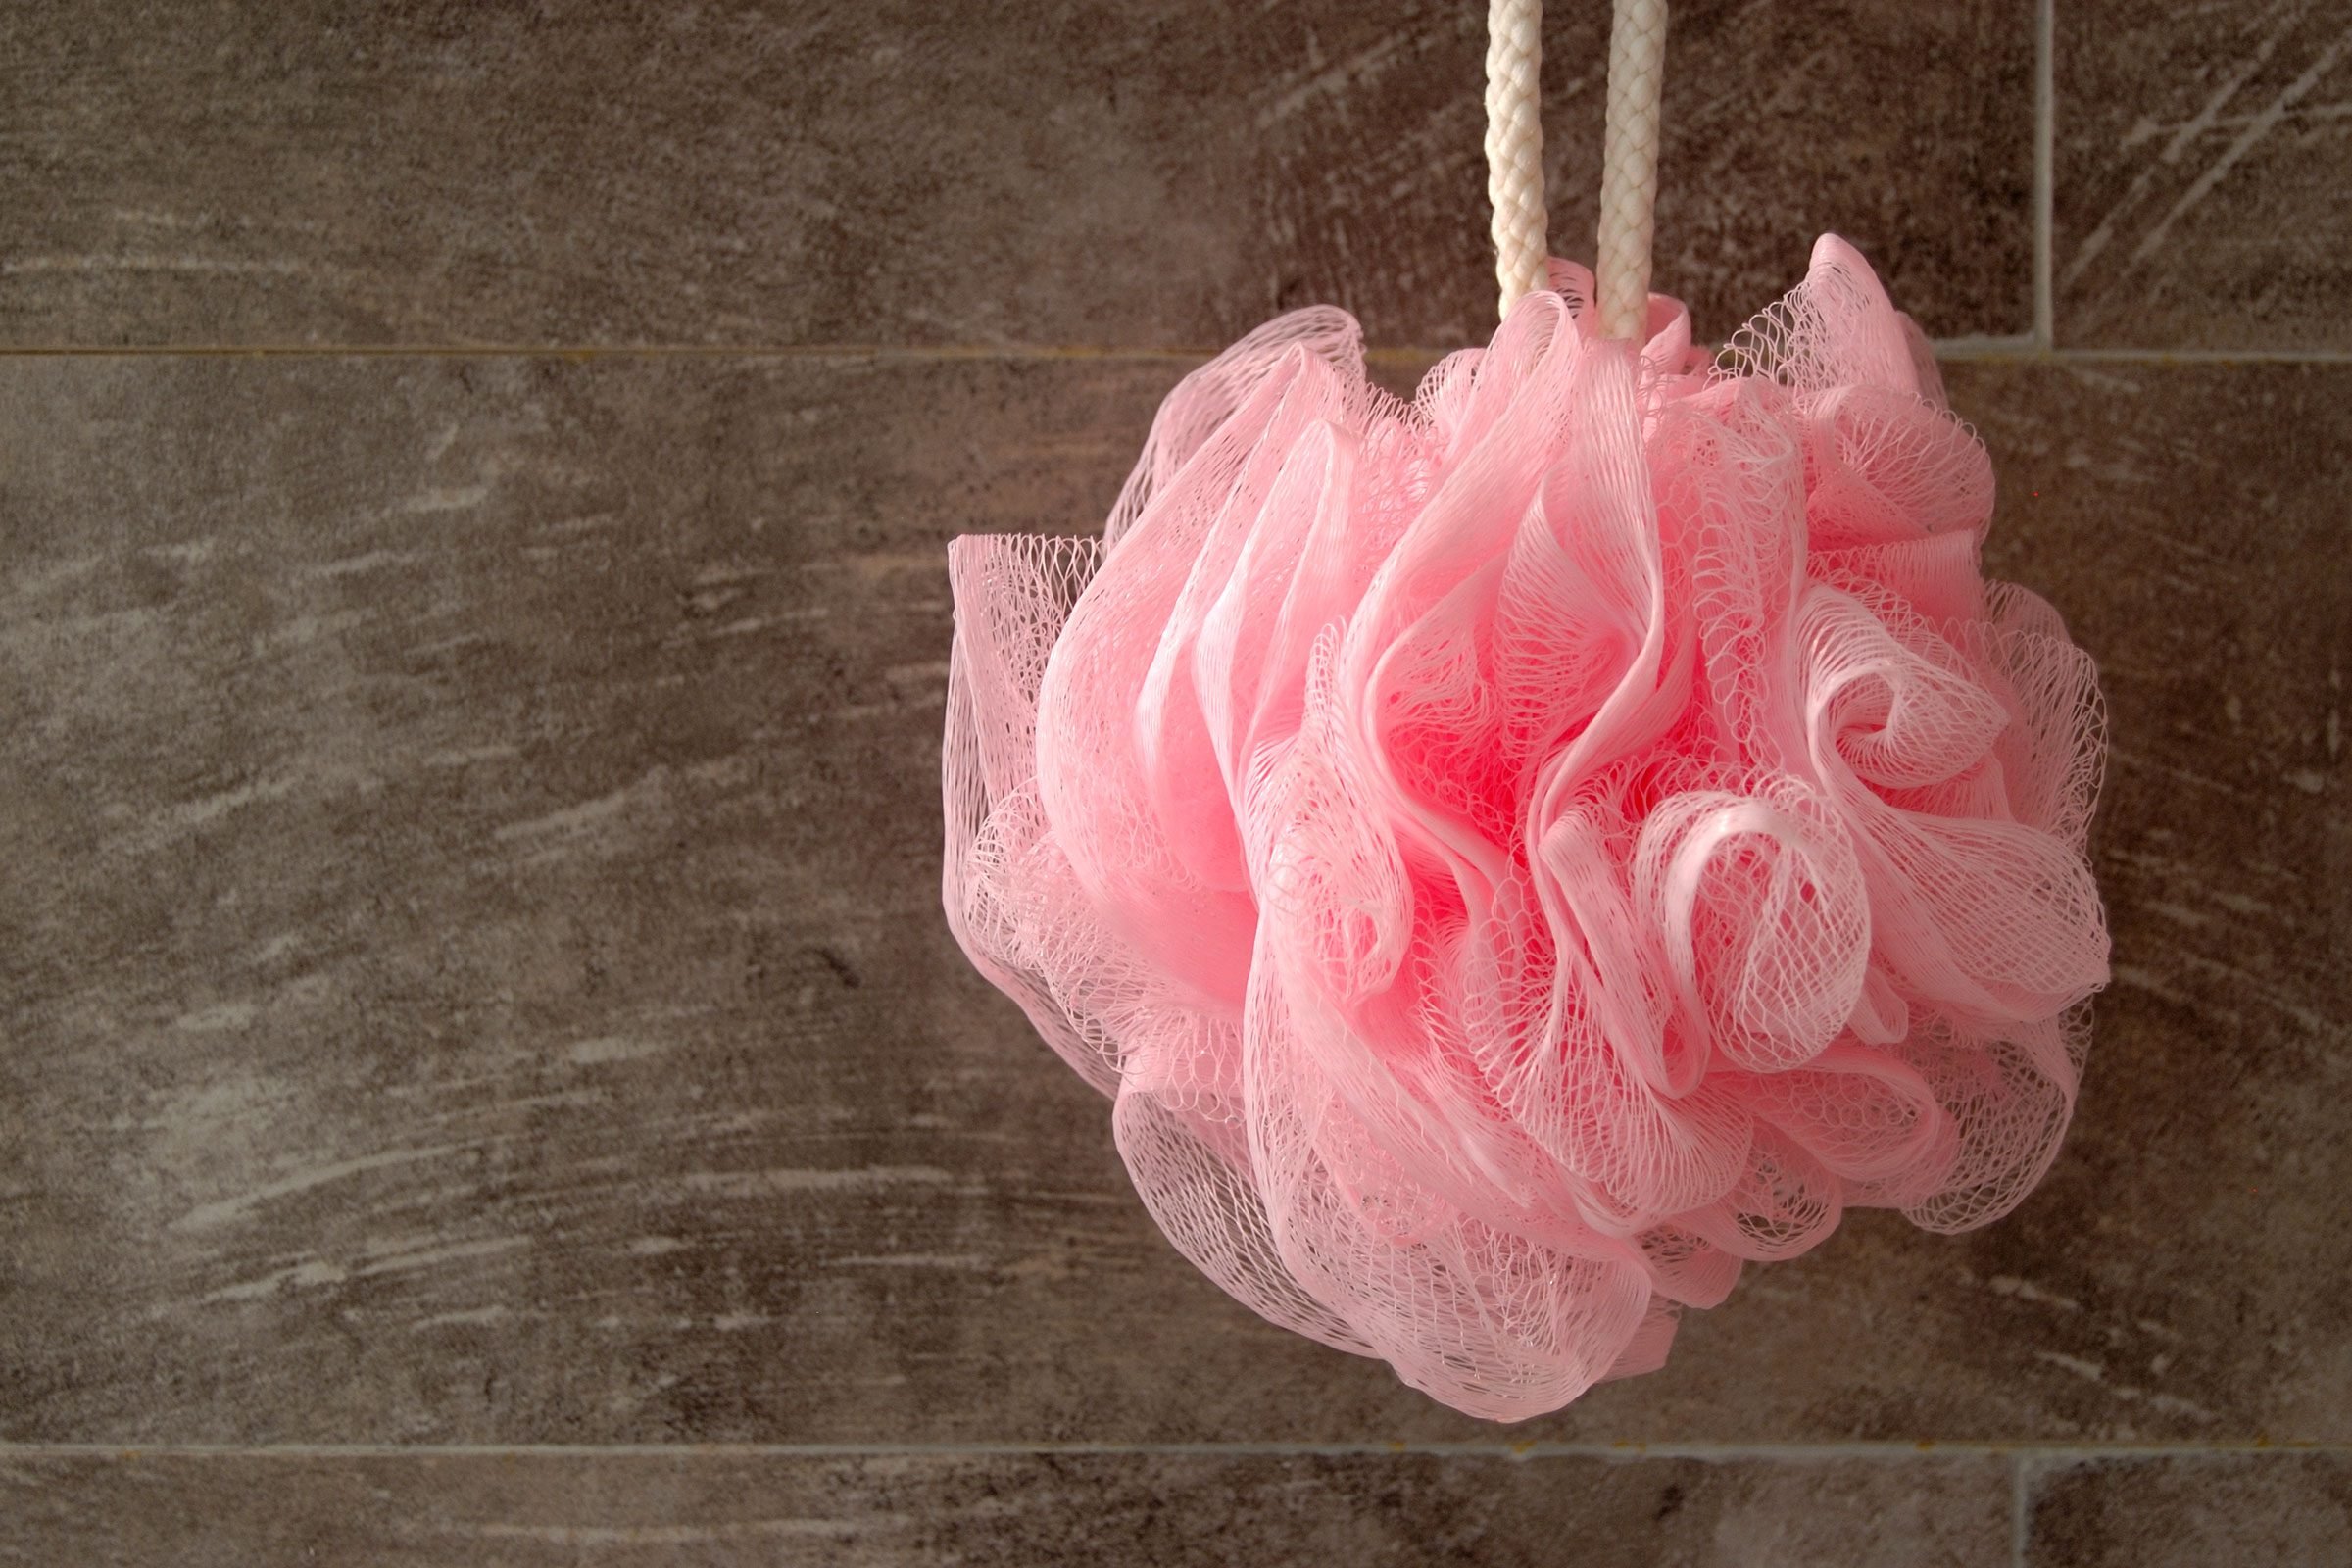 Exactly How Gross Is It to Share a Loofah?